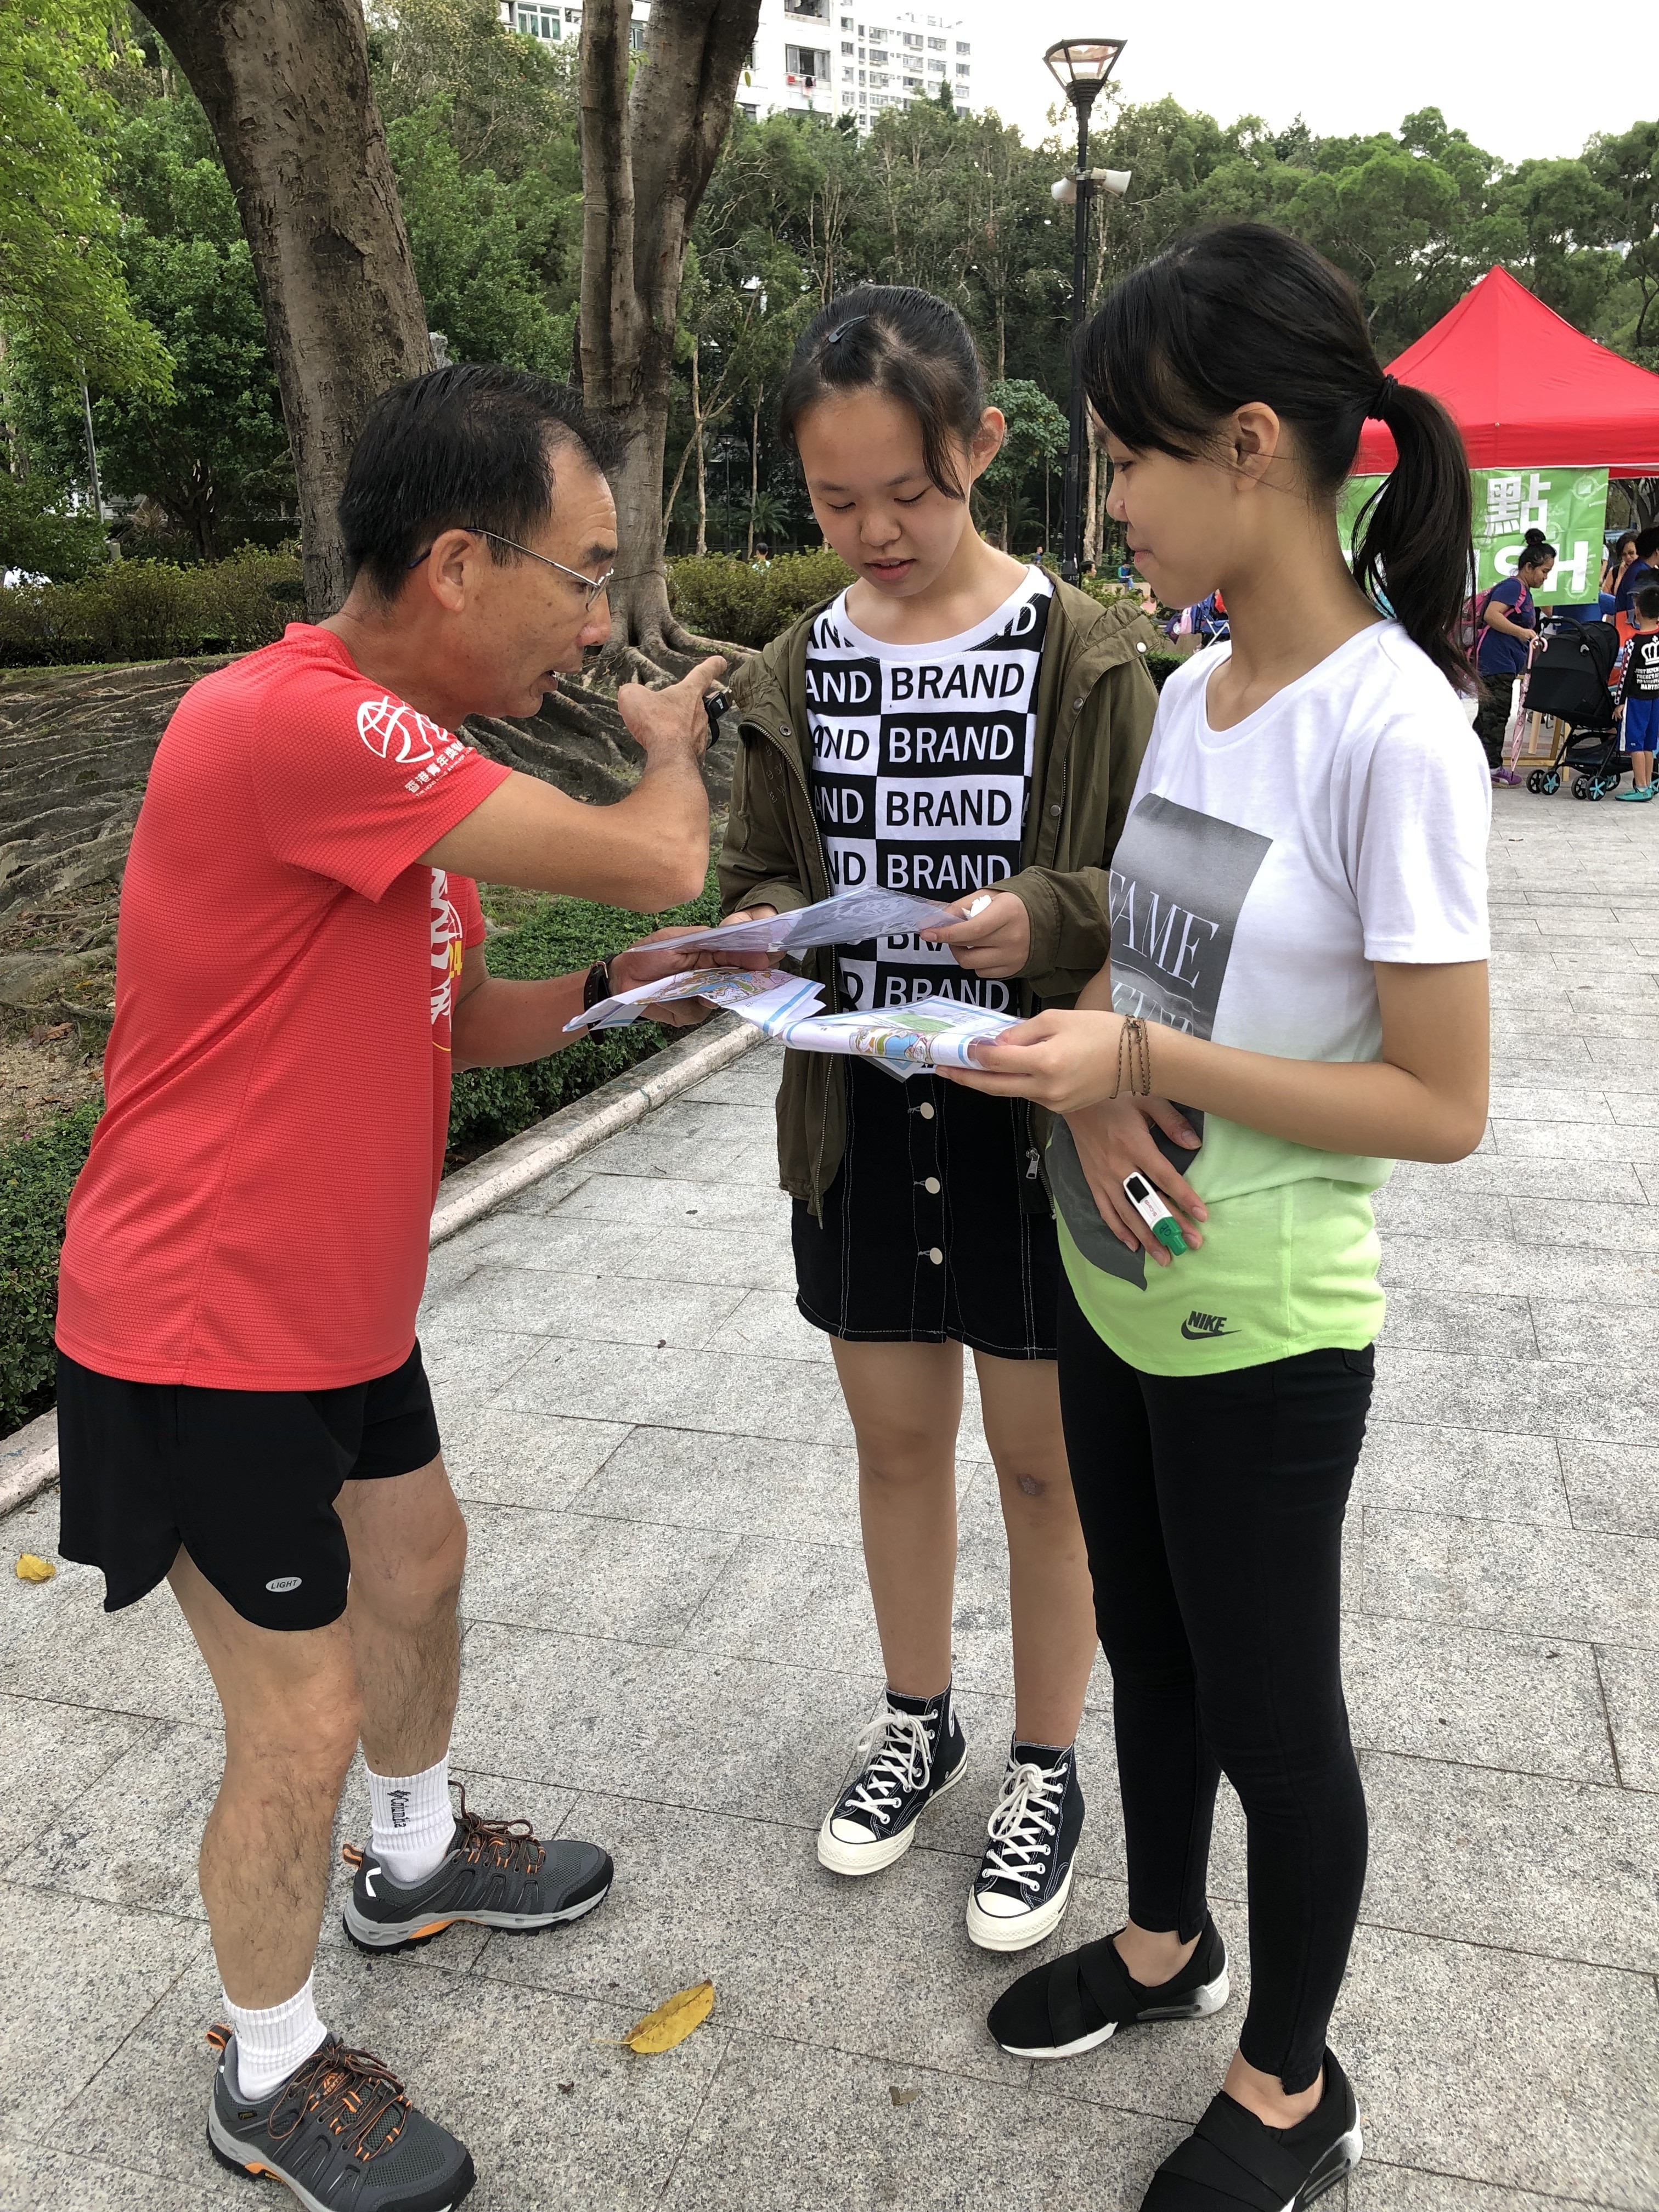 Three participants search for the correct route during the Orienteering@Park event in Tuen Mun Park, Hong Kong. Photo: Nora Tong